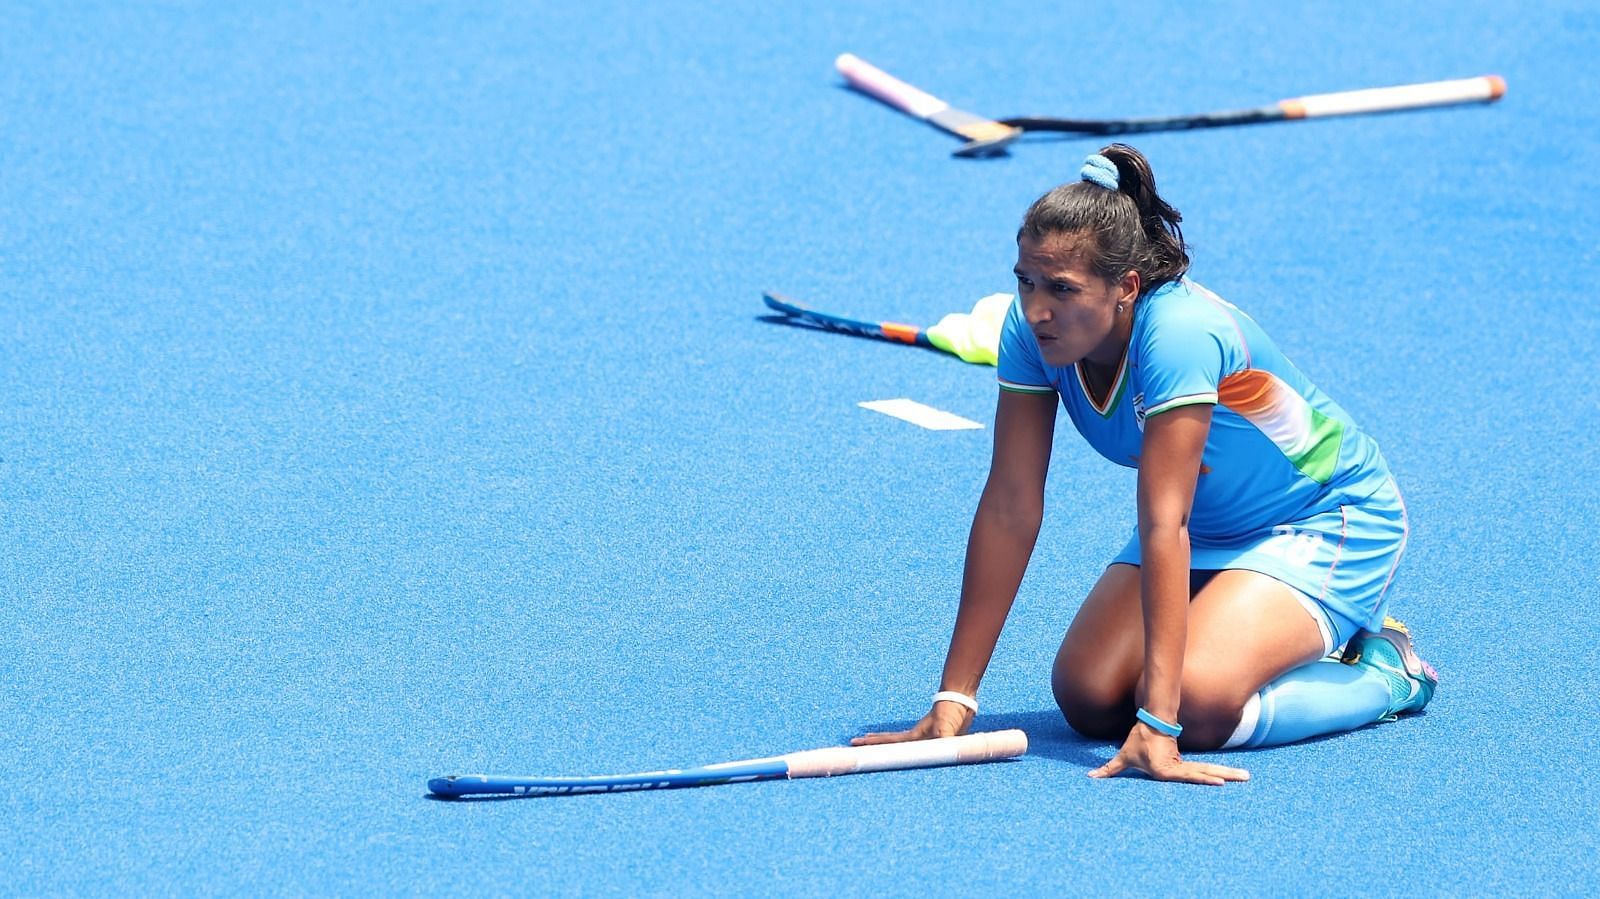 Rani Rampal in action for India (Image Credits: Olympics.com)